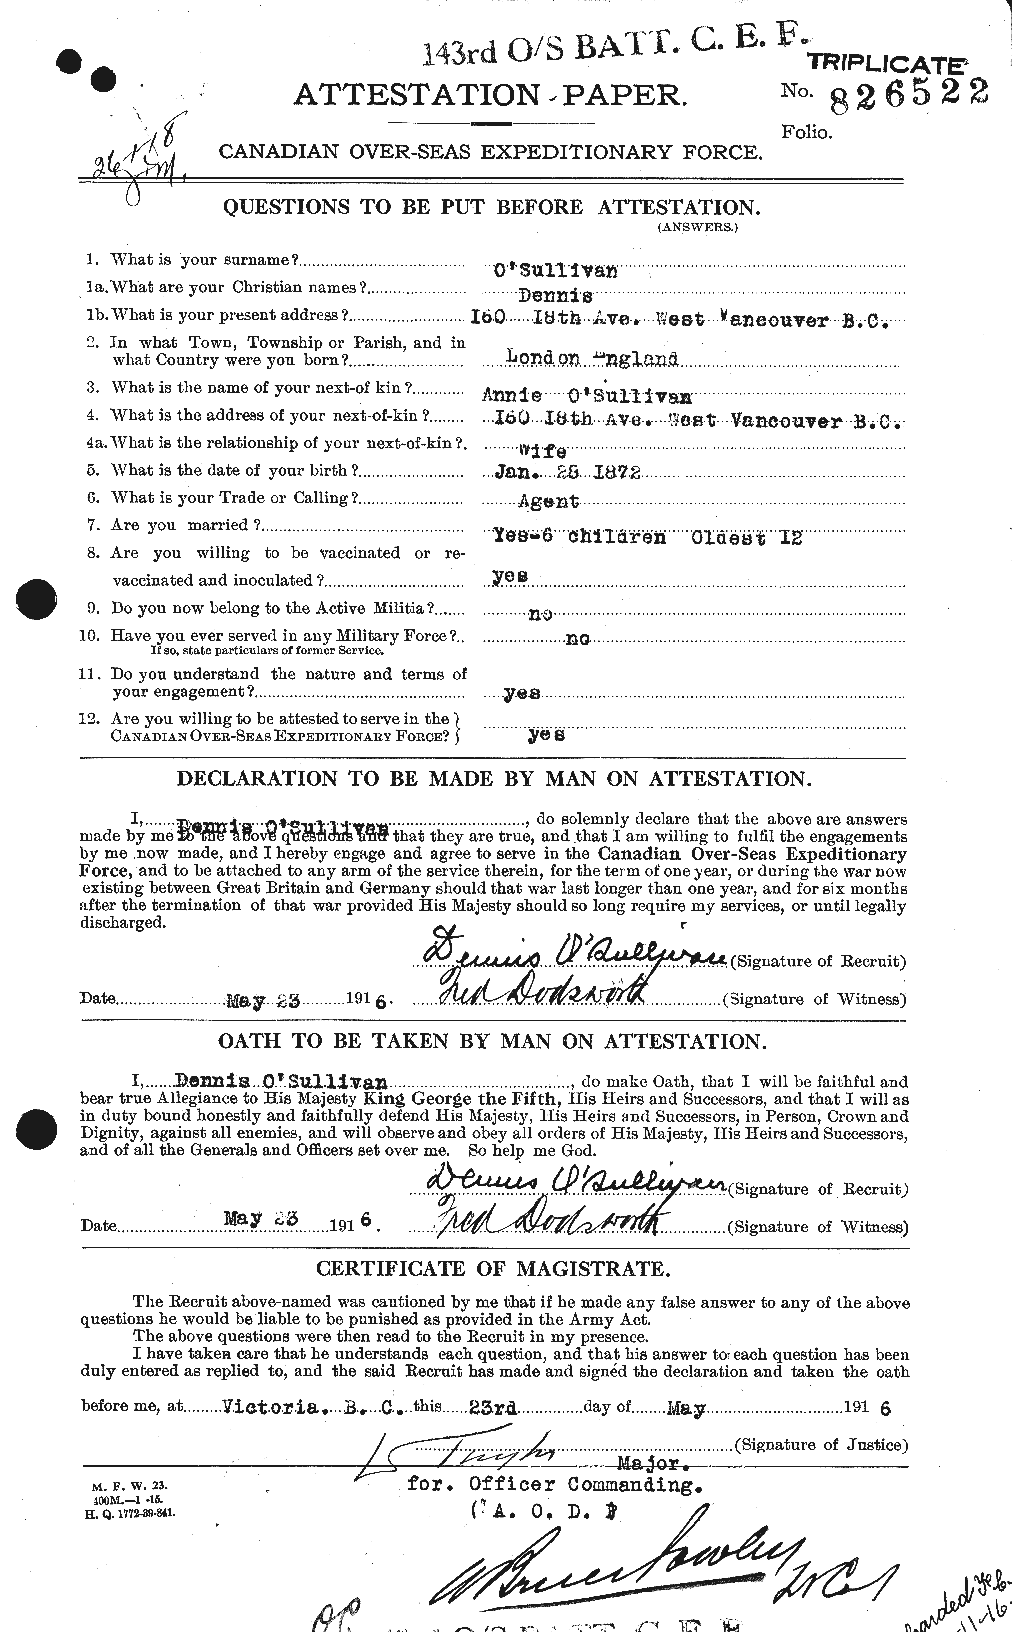 Personnel Records of the First World War - CEF 560311a